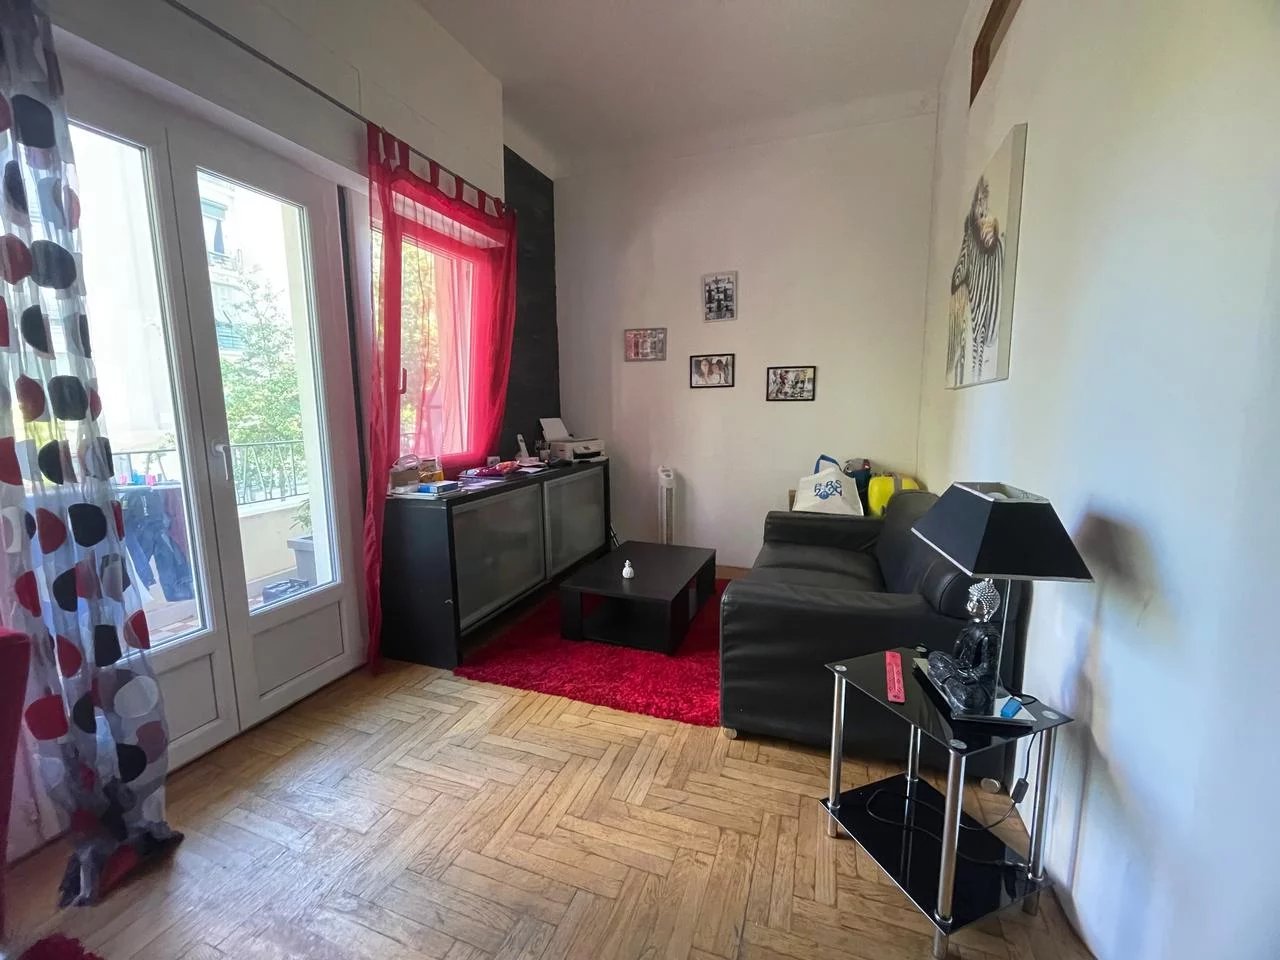 Appartement  2 Rooms 28.83m2  for sale   160 000 €